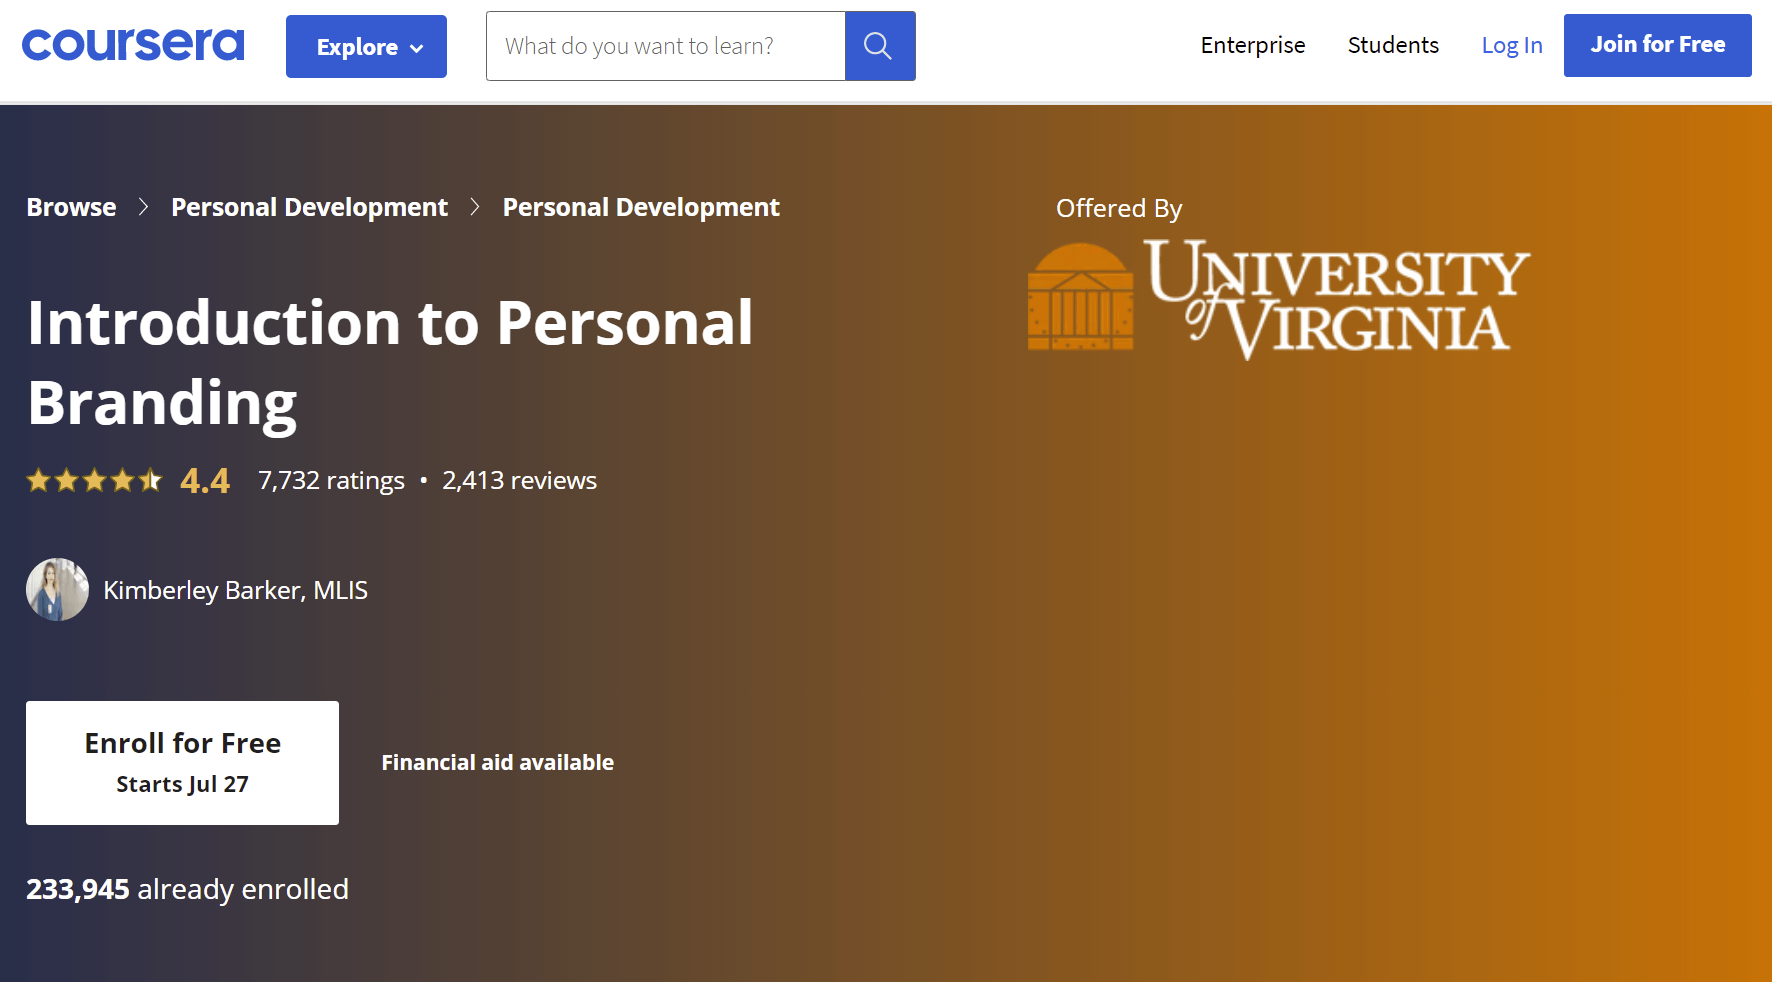 University of Virginia: Introduction to Personal Branding  Overview